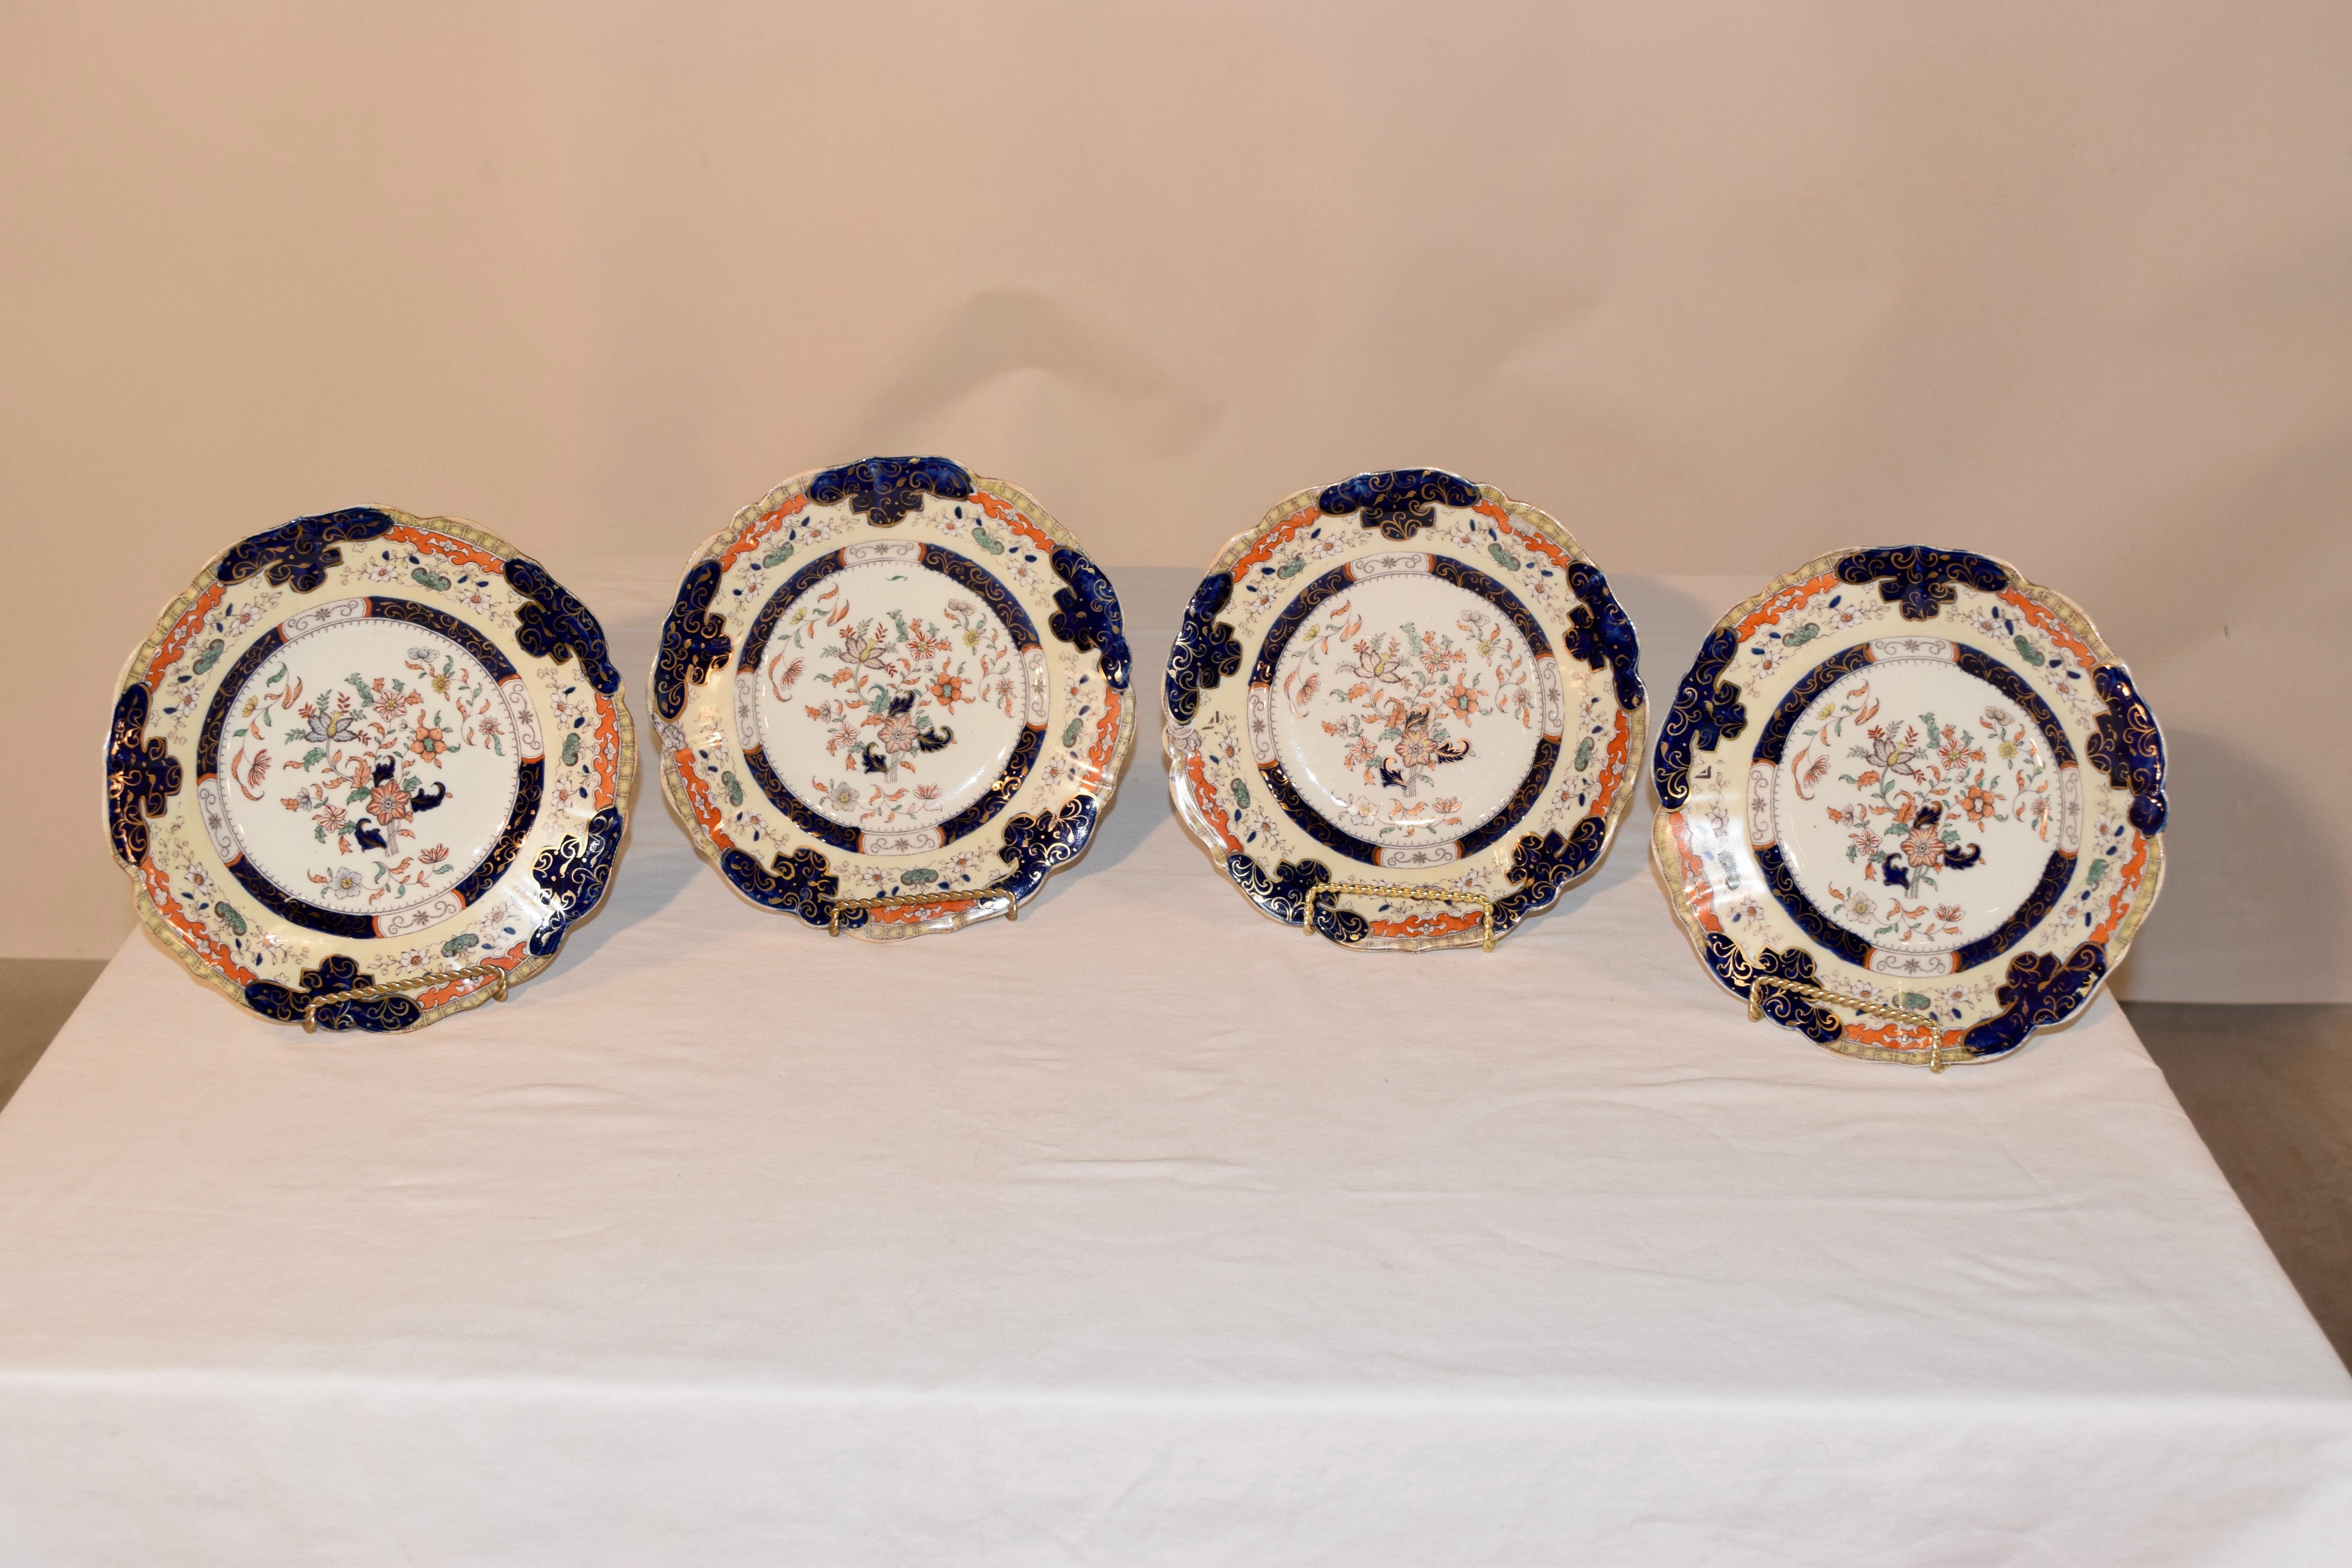 19th century set of four English ironstone plates, signed Mason's over a crown and banner. The plates are transfer decorated in a pattern of florals and vines, and have been hand painted as well.